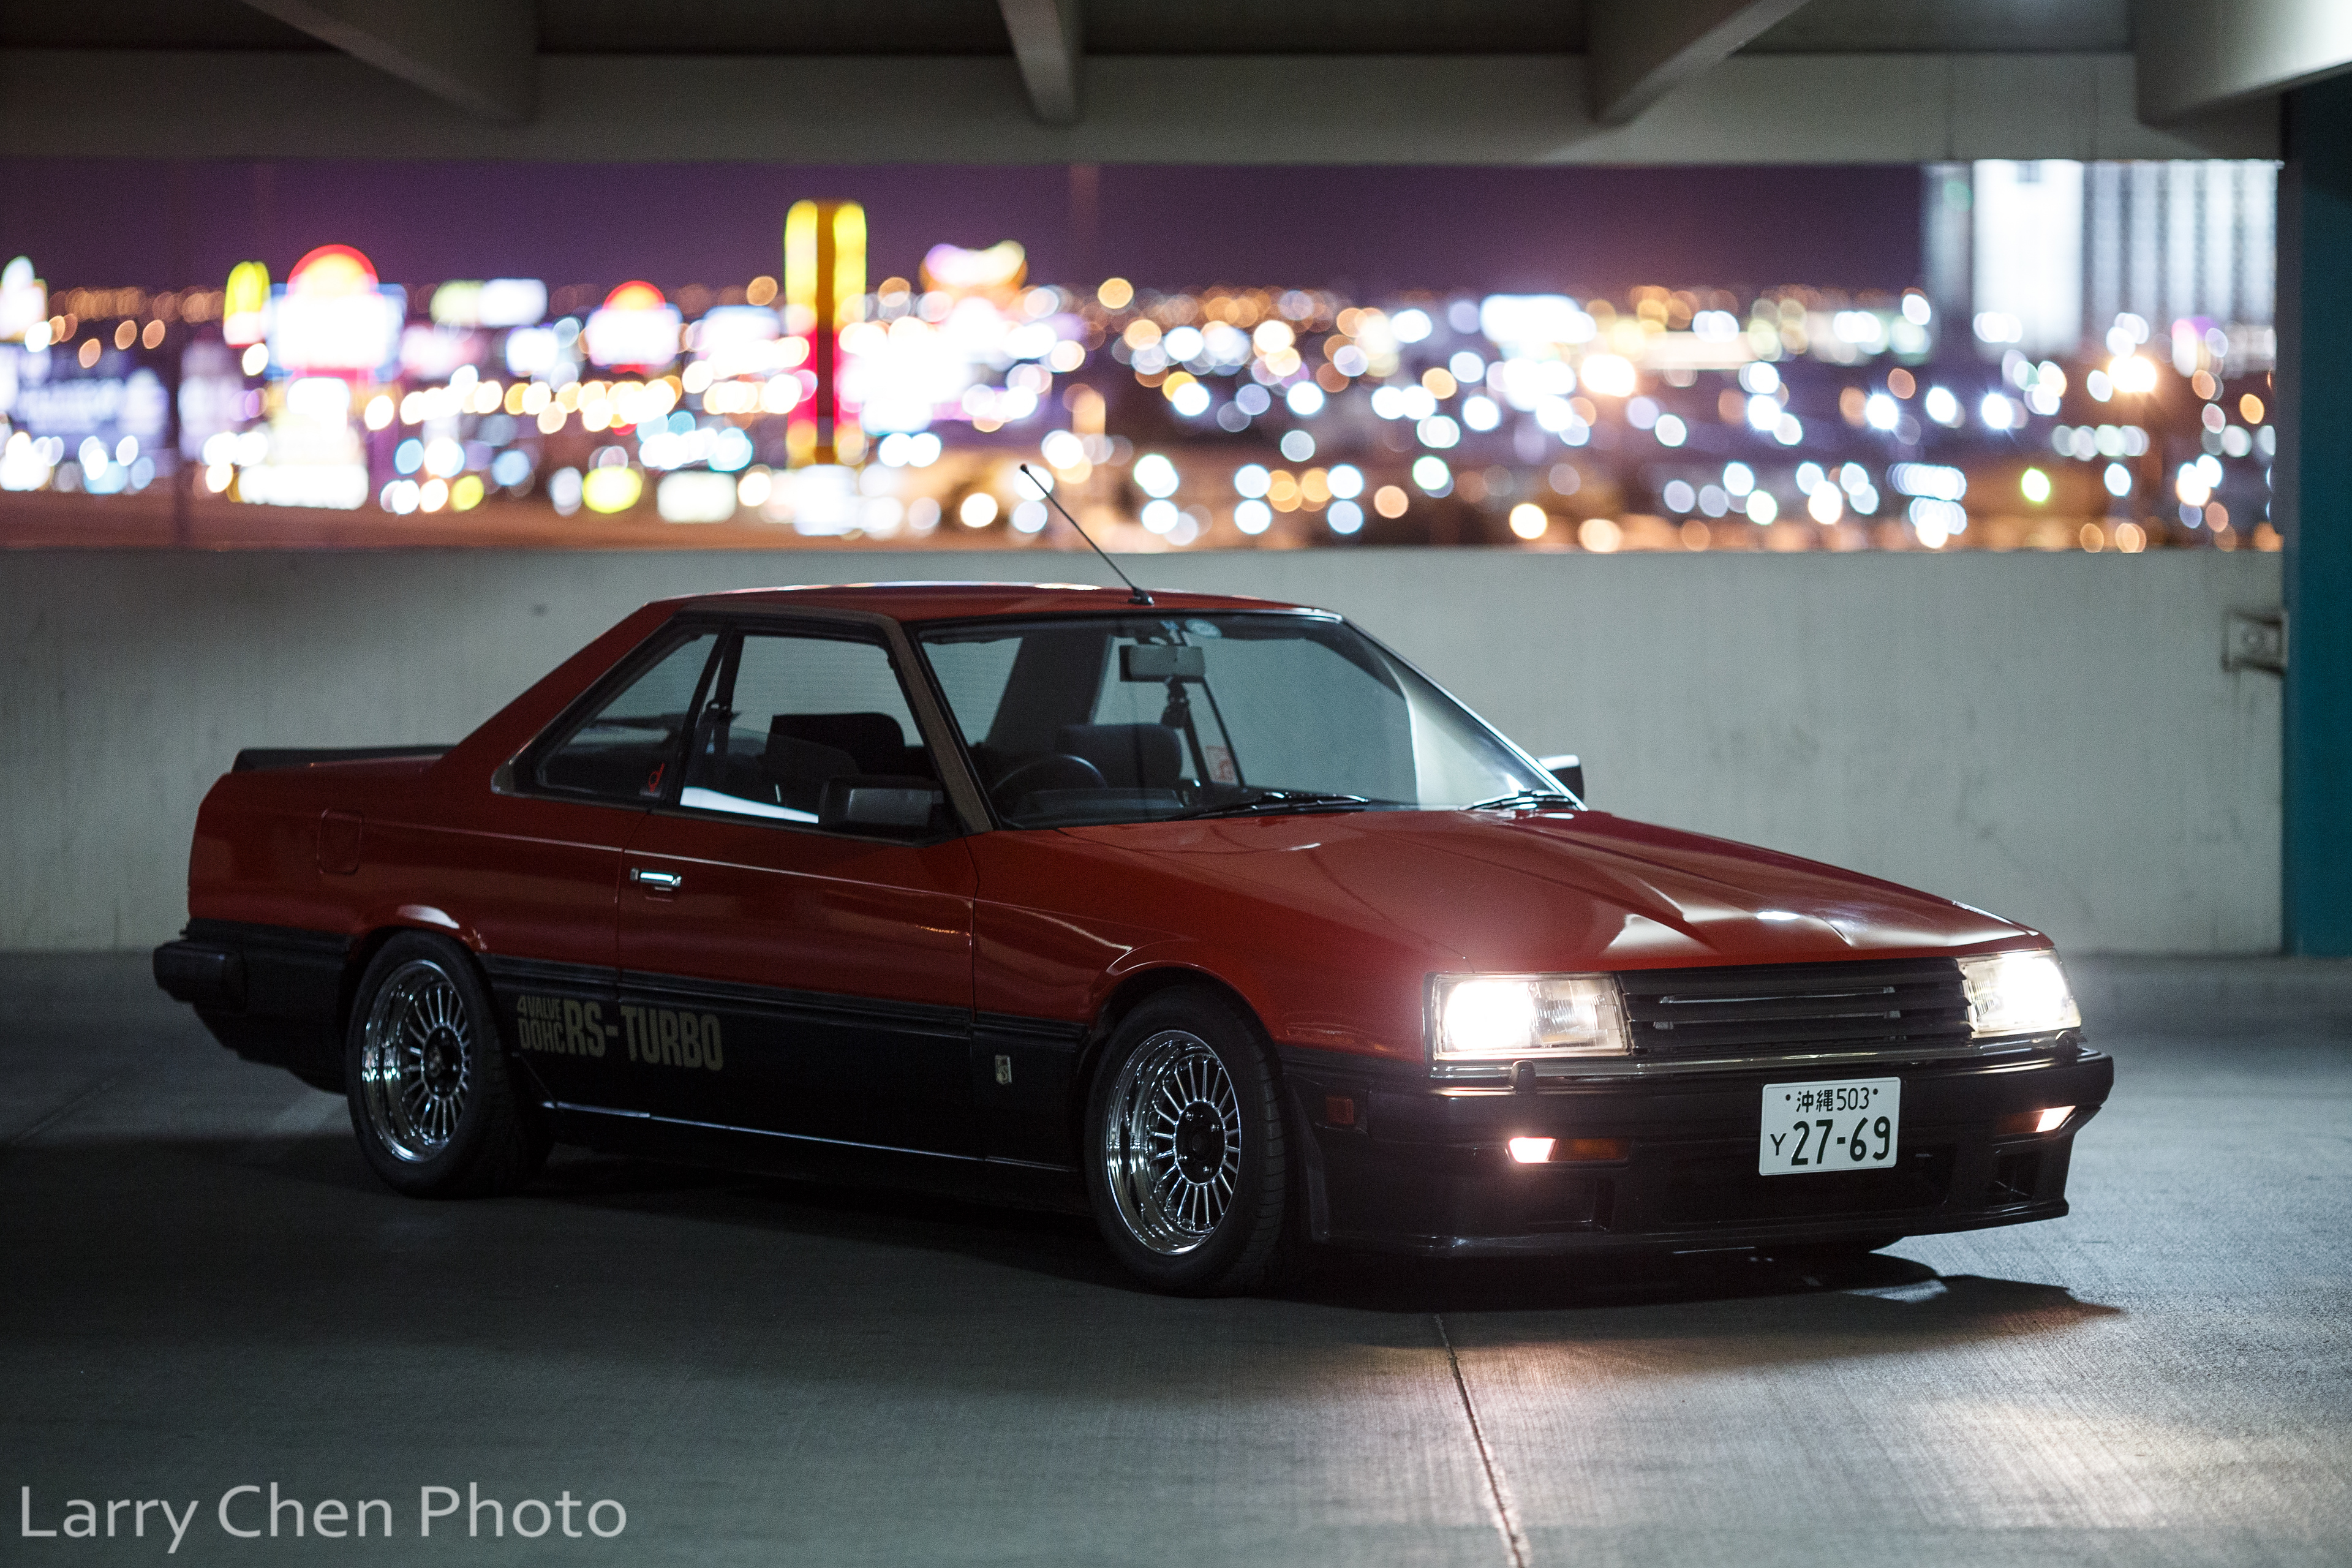 General 3840x2560 Nissan Skyline red cars Japanese cars night city lights sports car Larry Chen